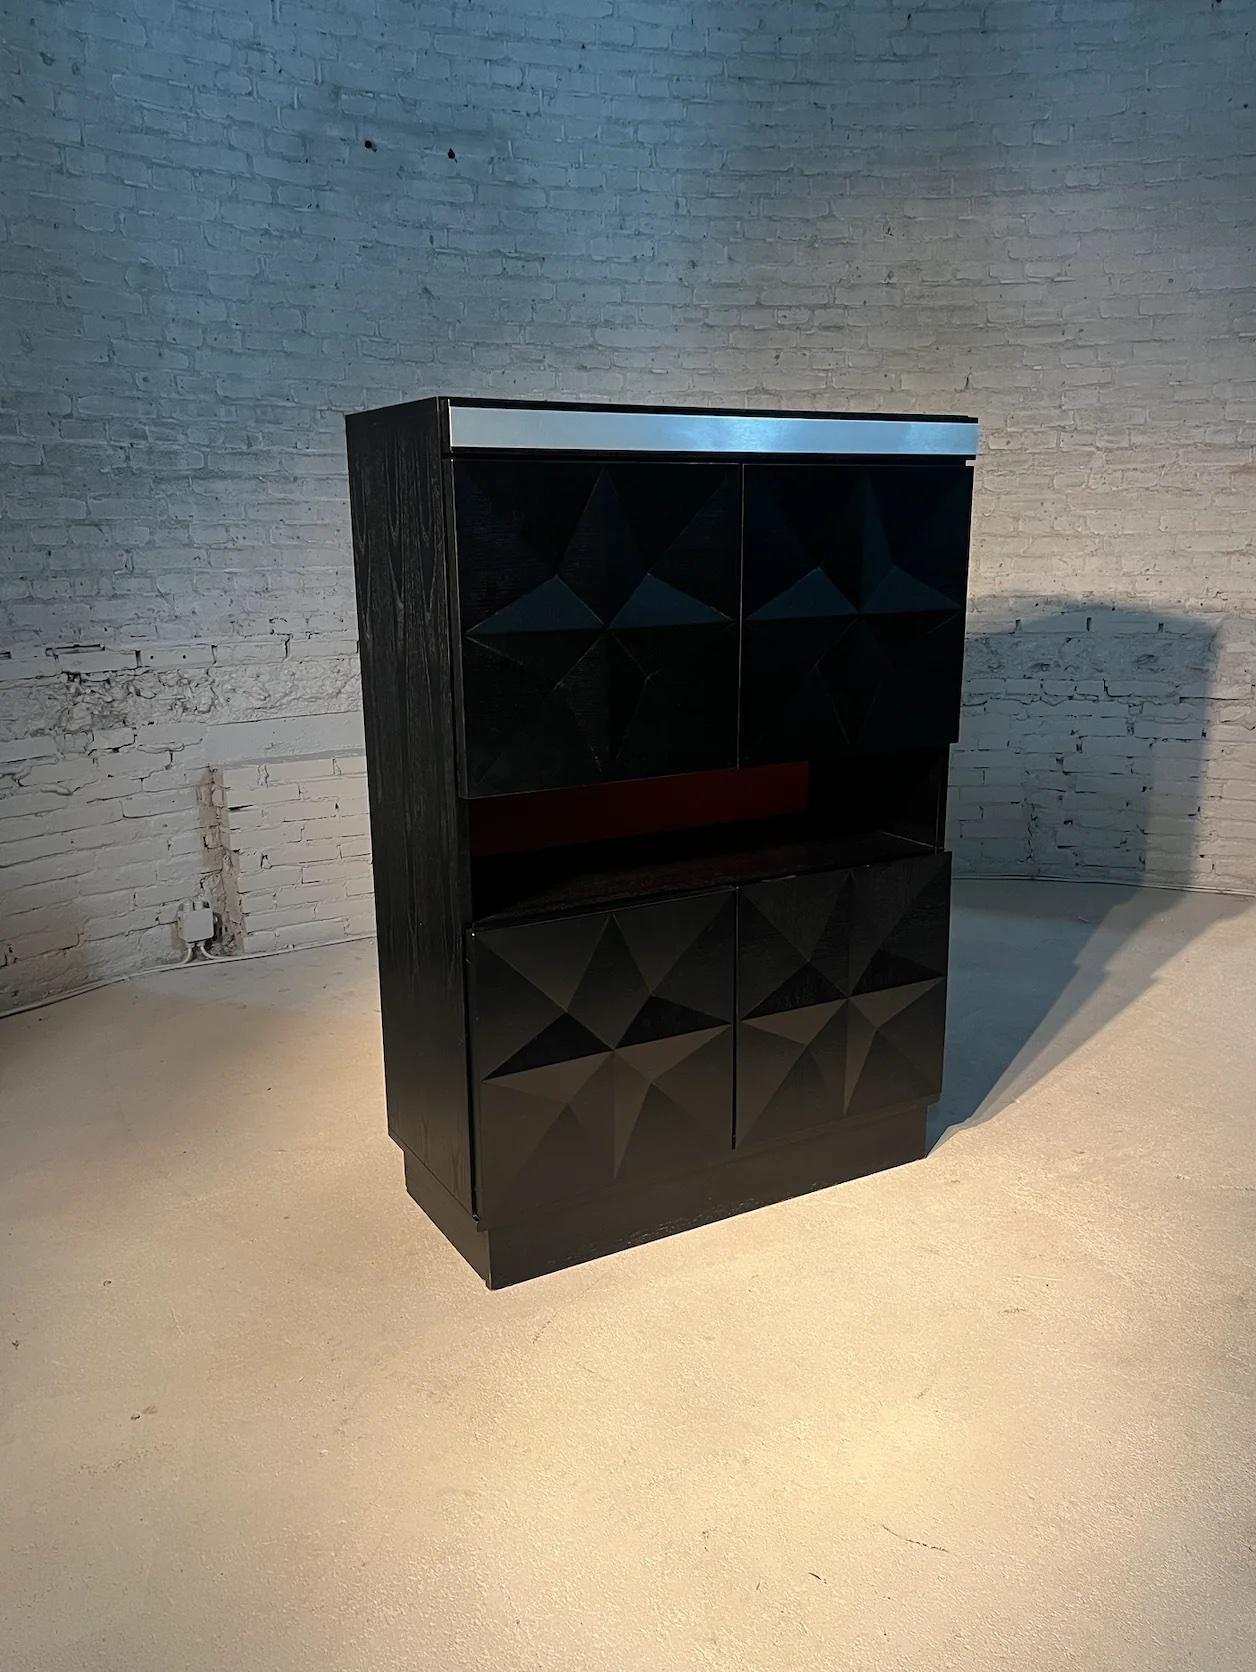 This Belgian masterpiece, attributed to De Coene in Kortrijk in the 1970s showcases an iconic diamond-shaped pattern, which gives the cabinet the typical brutalist aesthetics.

The 4 door cabinet  is spacious and stylish. Complete with a light when